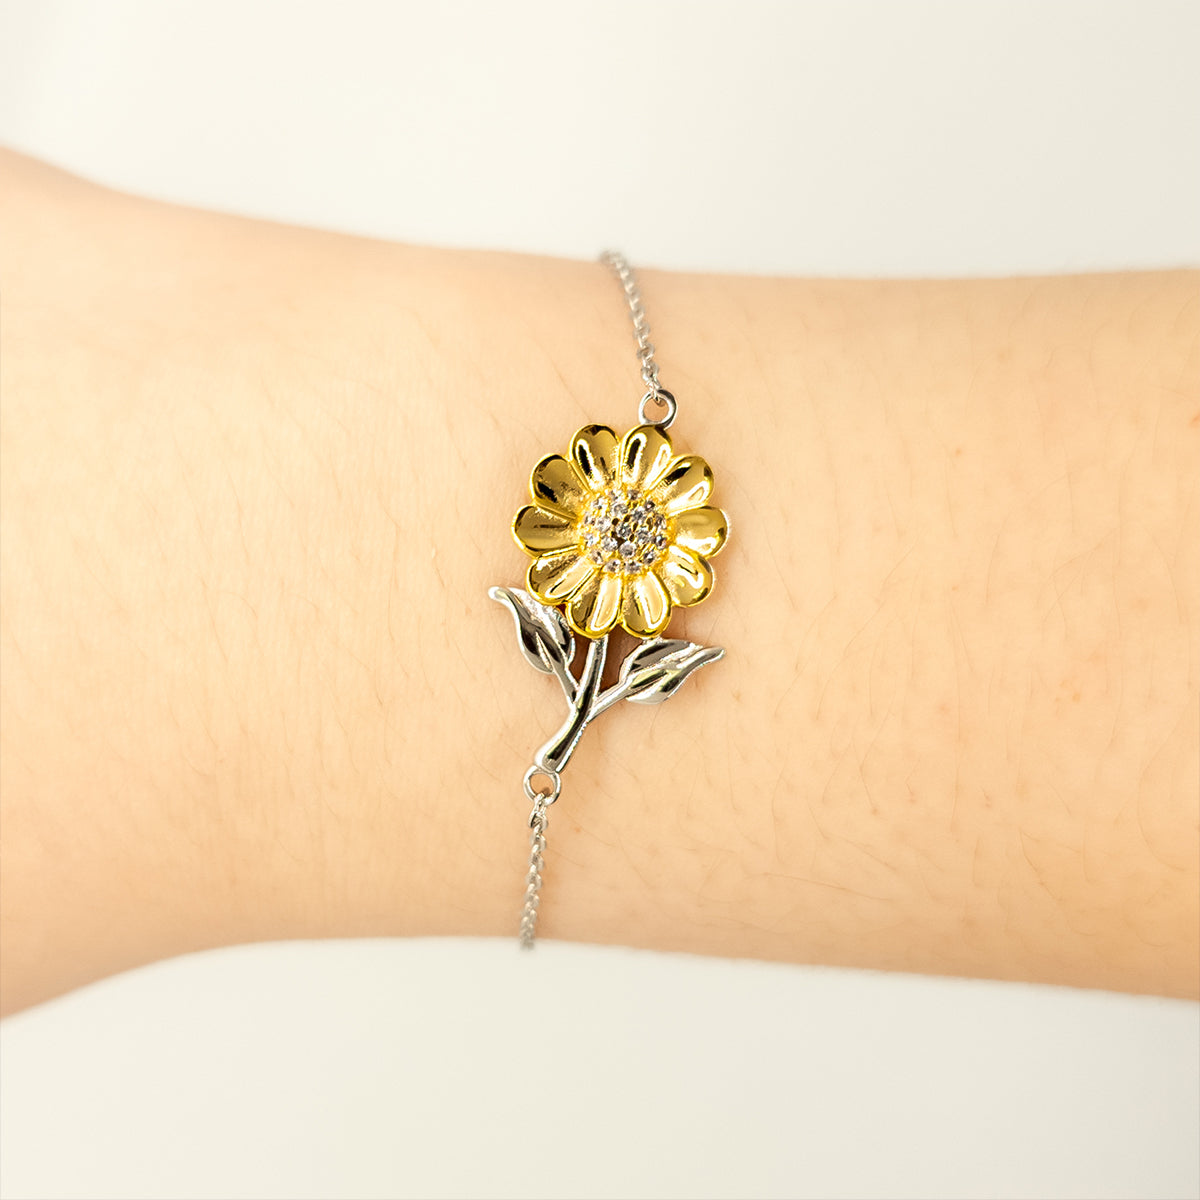 Mom Sunflower Bracelet - You will always have a special place in my heart - Meaningful and Unique Gift for Mothers Day, Birthday, Christmas, and Any Special Occasions - Perfect Jewelry for Mom